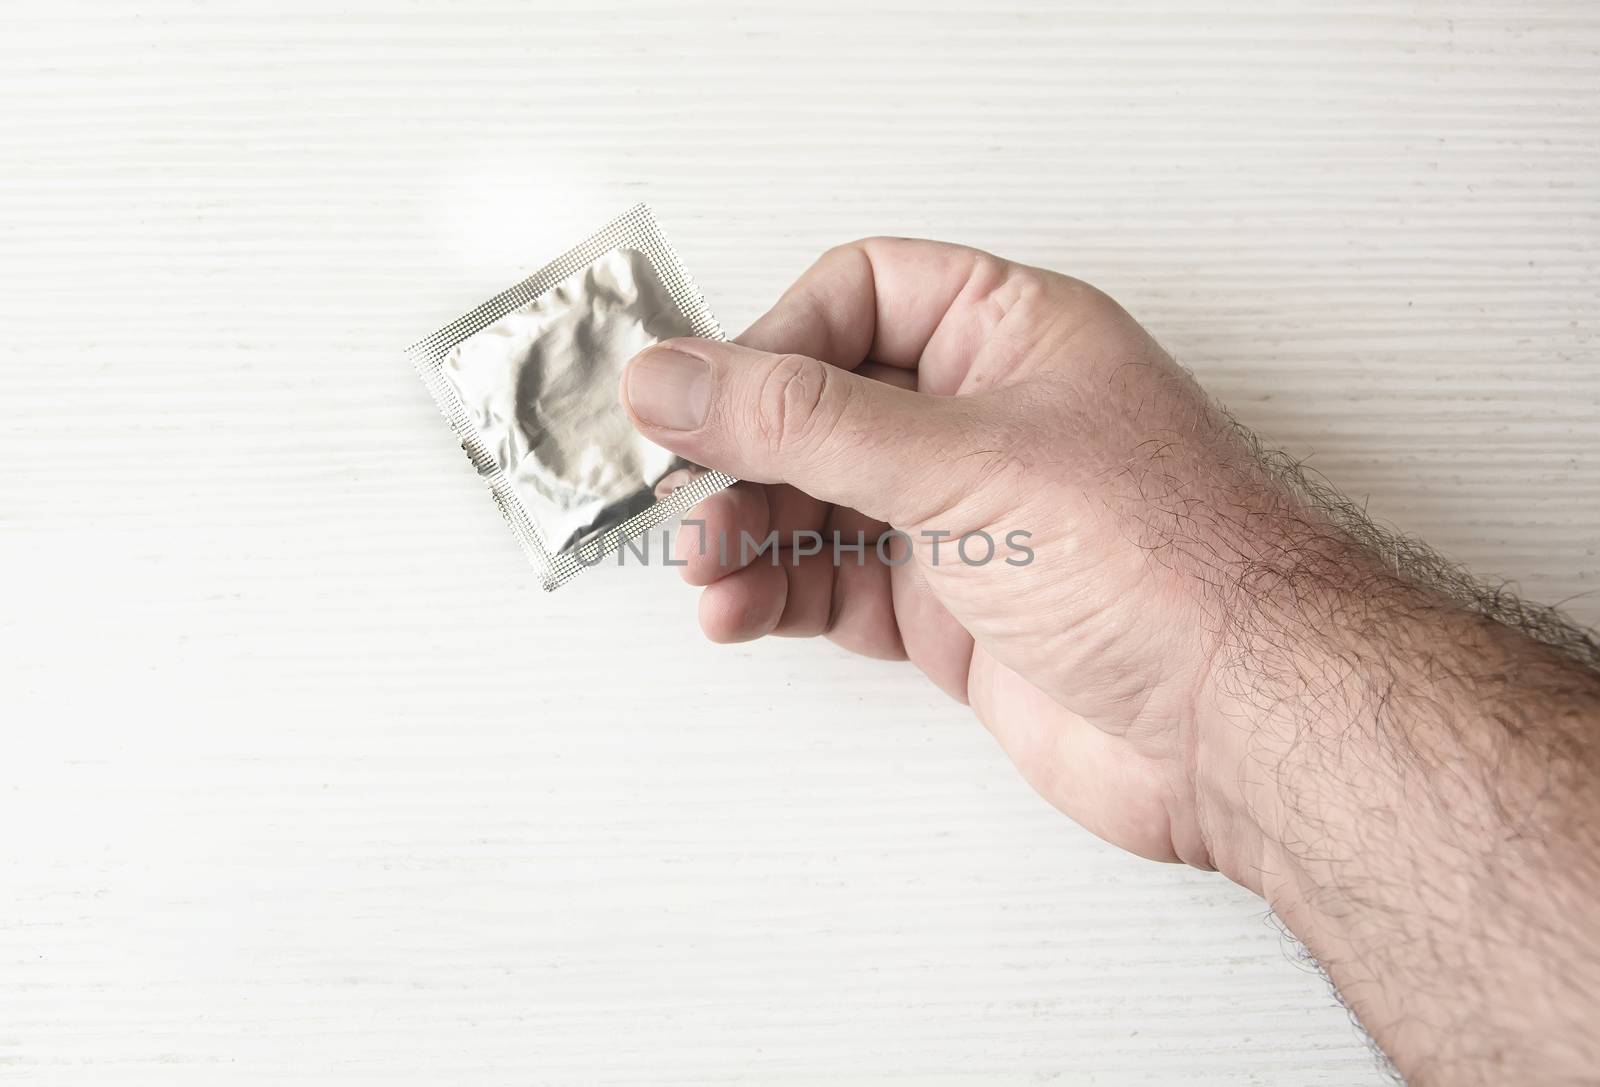 A male hand holding a condom packed by rarrarorro